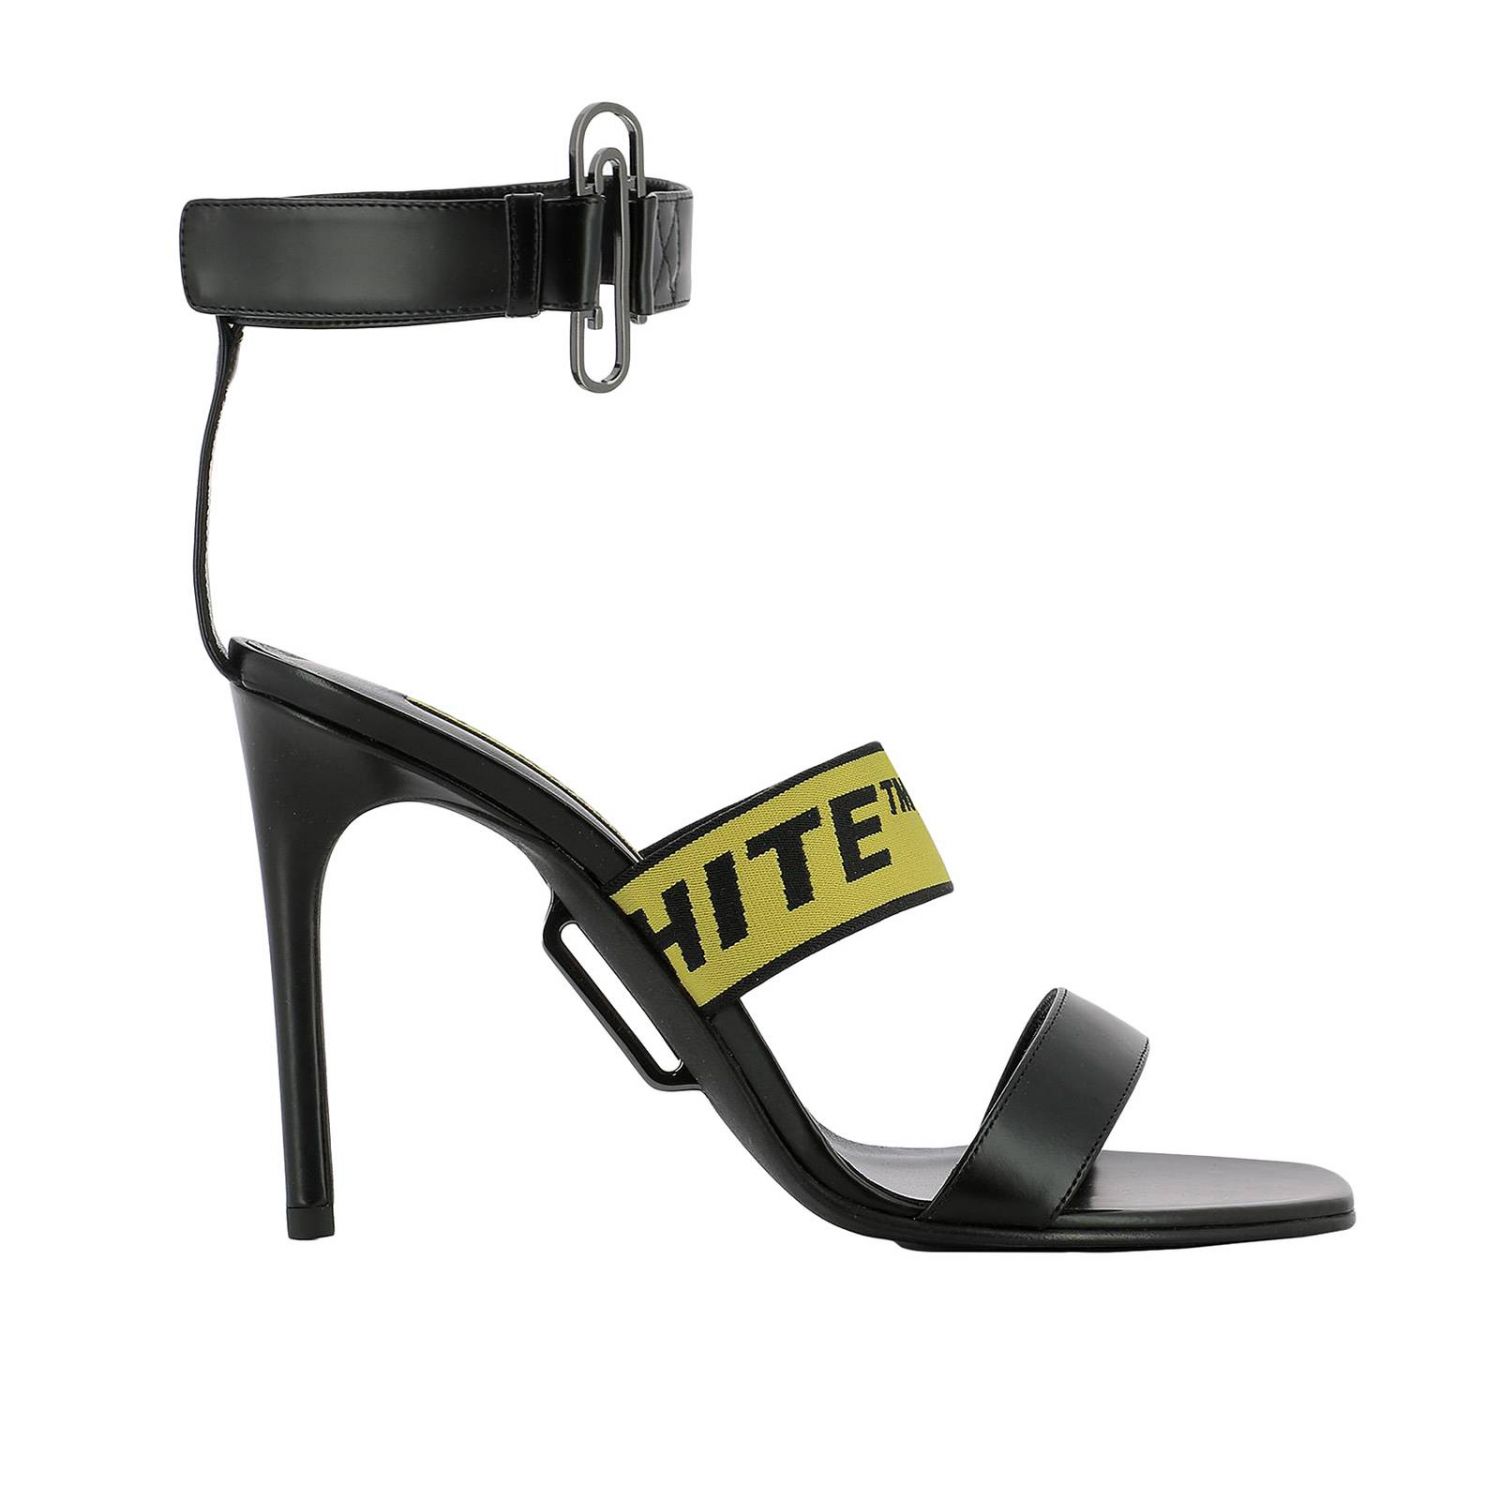 off white high heel shoes